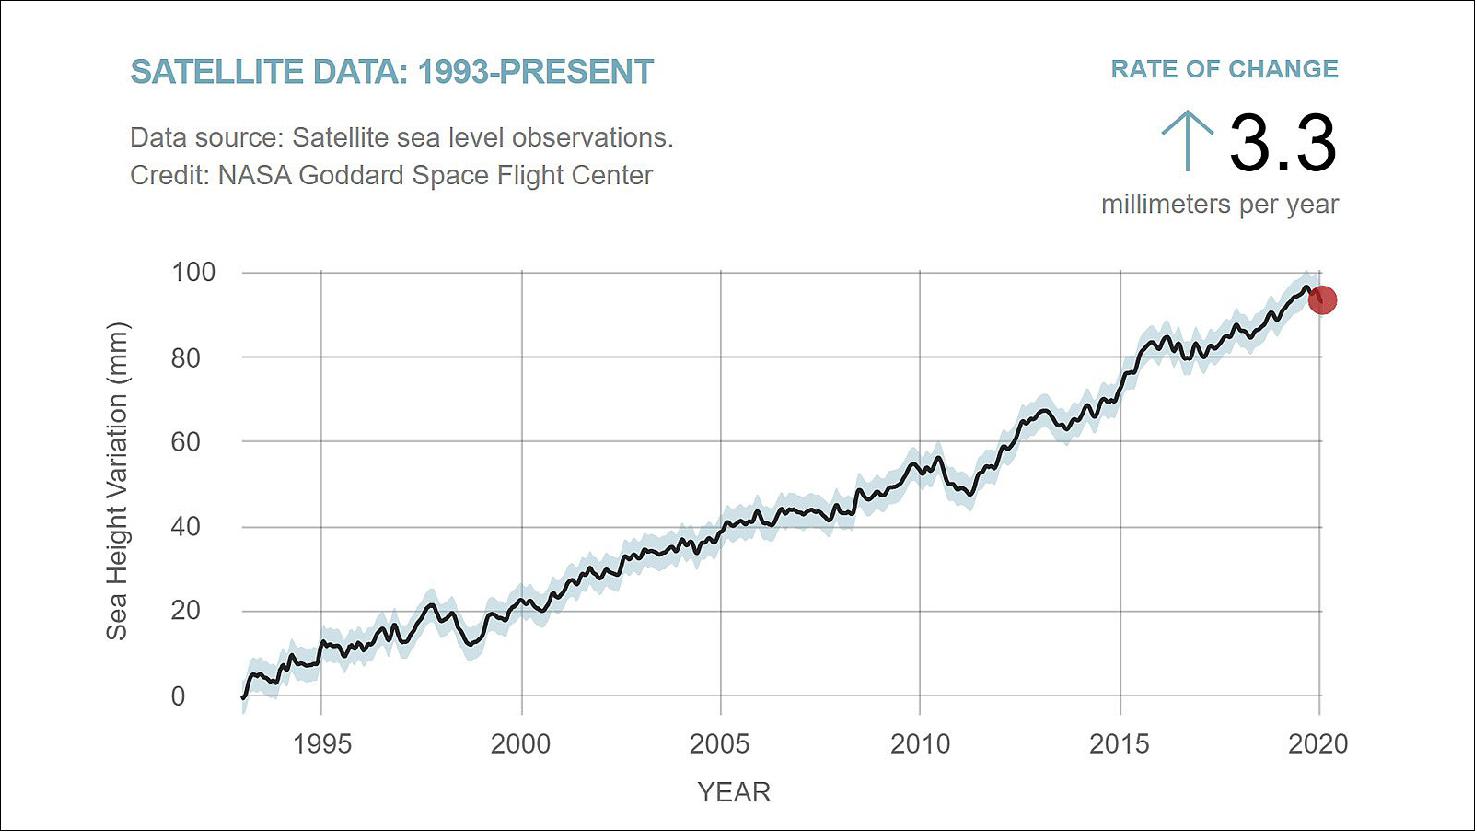 Figure 65: This chart shows the rise in global average sea level from January 1993 to January 2020. The measurement is made using data collected by the Sentinel-6/Jason-CS mission's predecessors, the TOPEX/Poseidon, Jason-1, OSTM/Jason-2, and Jason-3 satellite missions (image credit: NASA Goddard Space Flight Center)